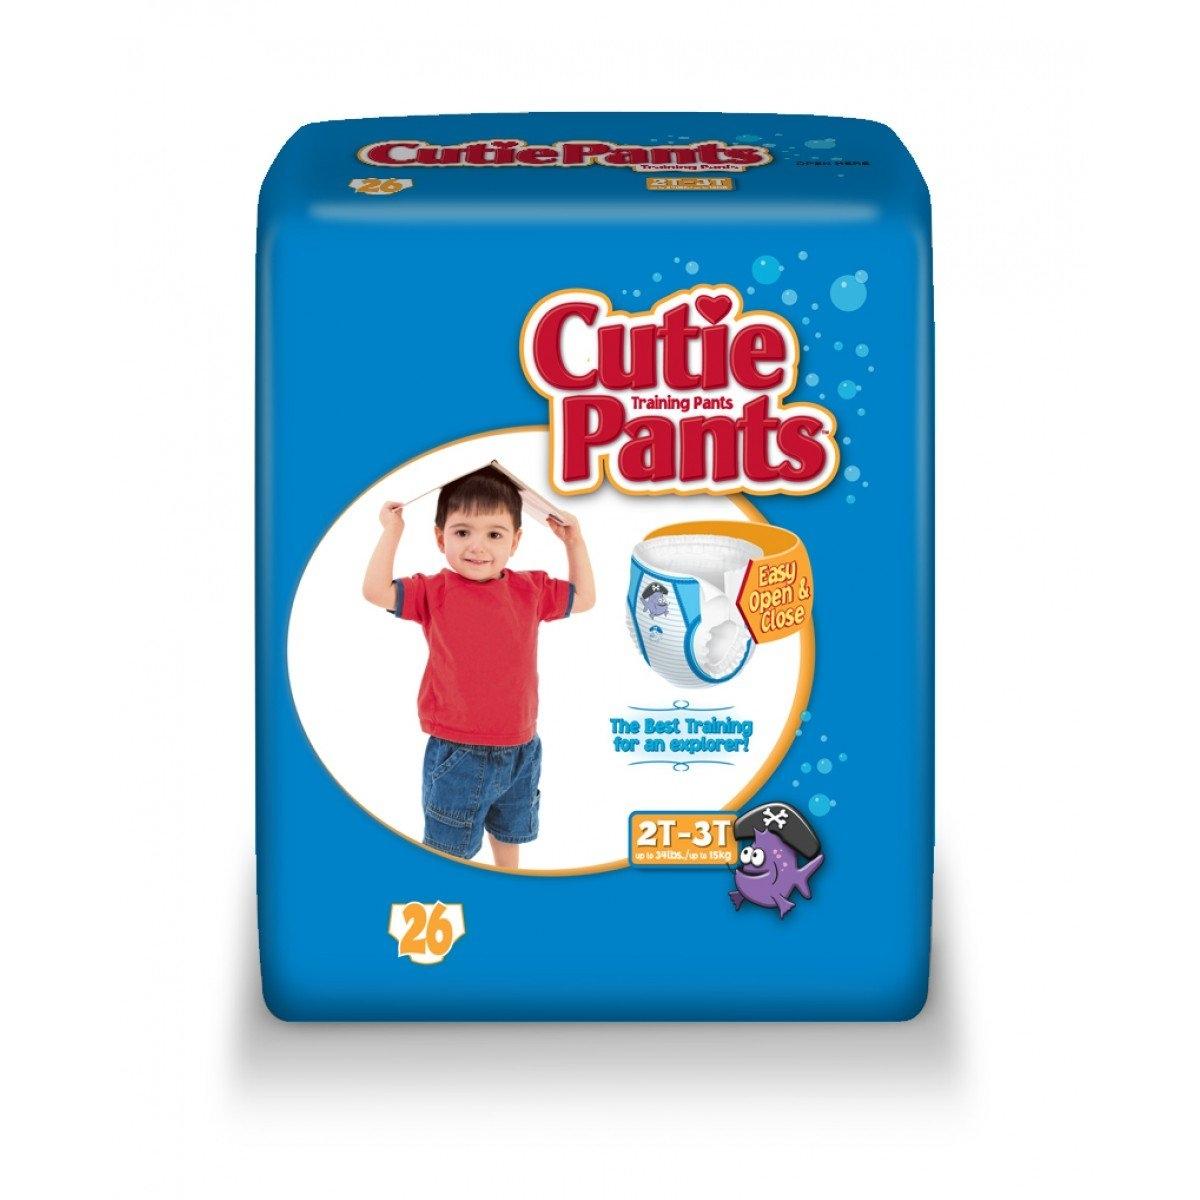 Basics For Kids Training Pants, Girls, Size 2T-3T (Up to 34 Lb